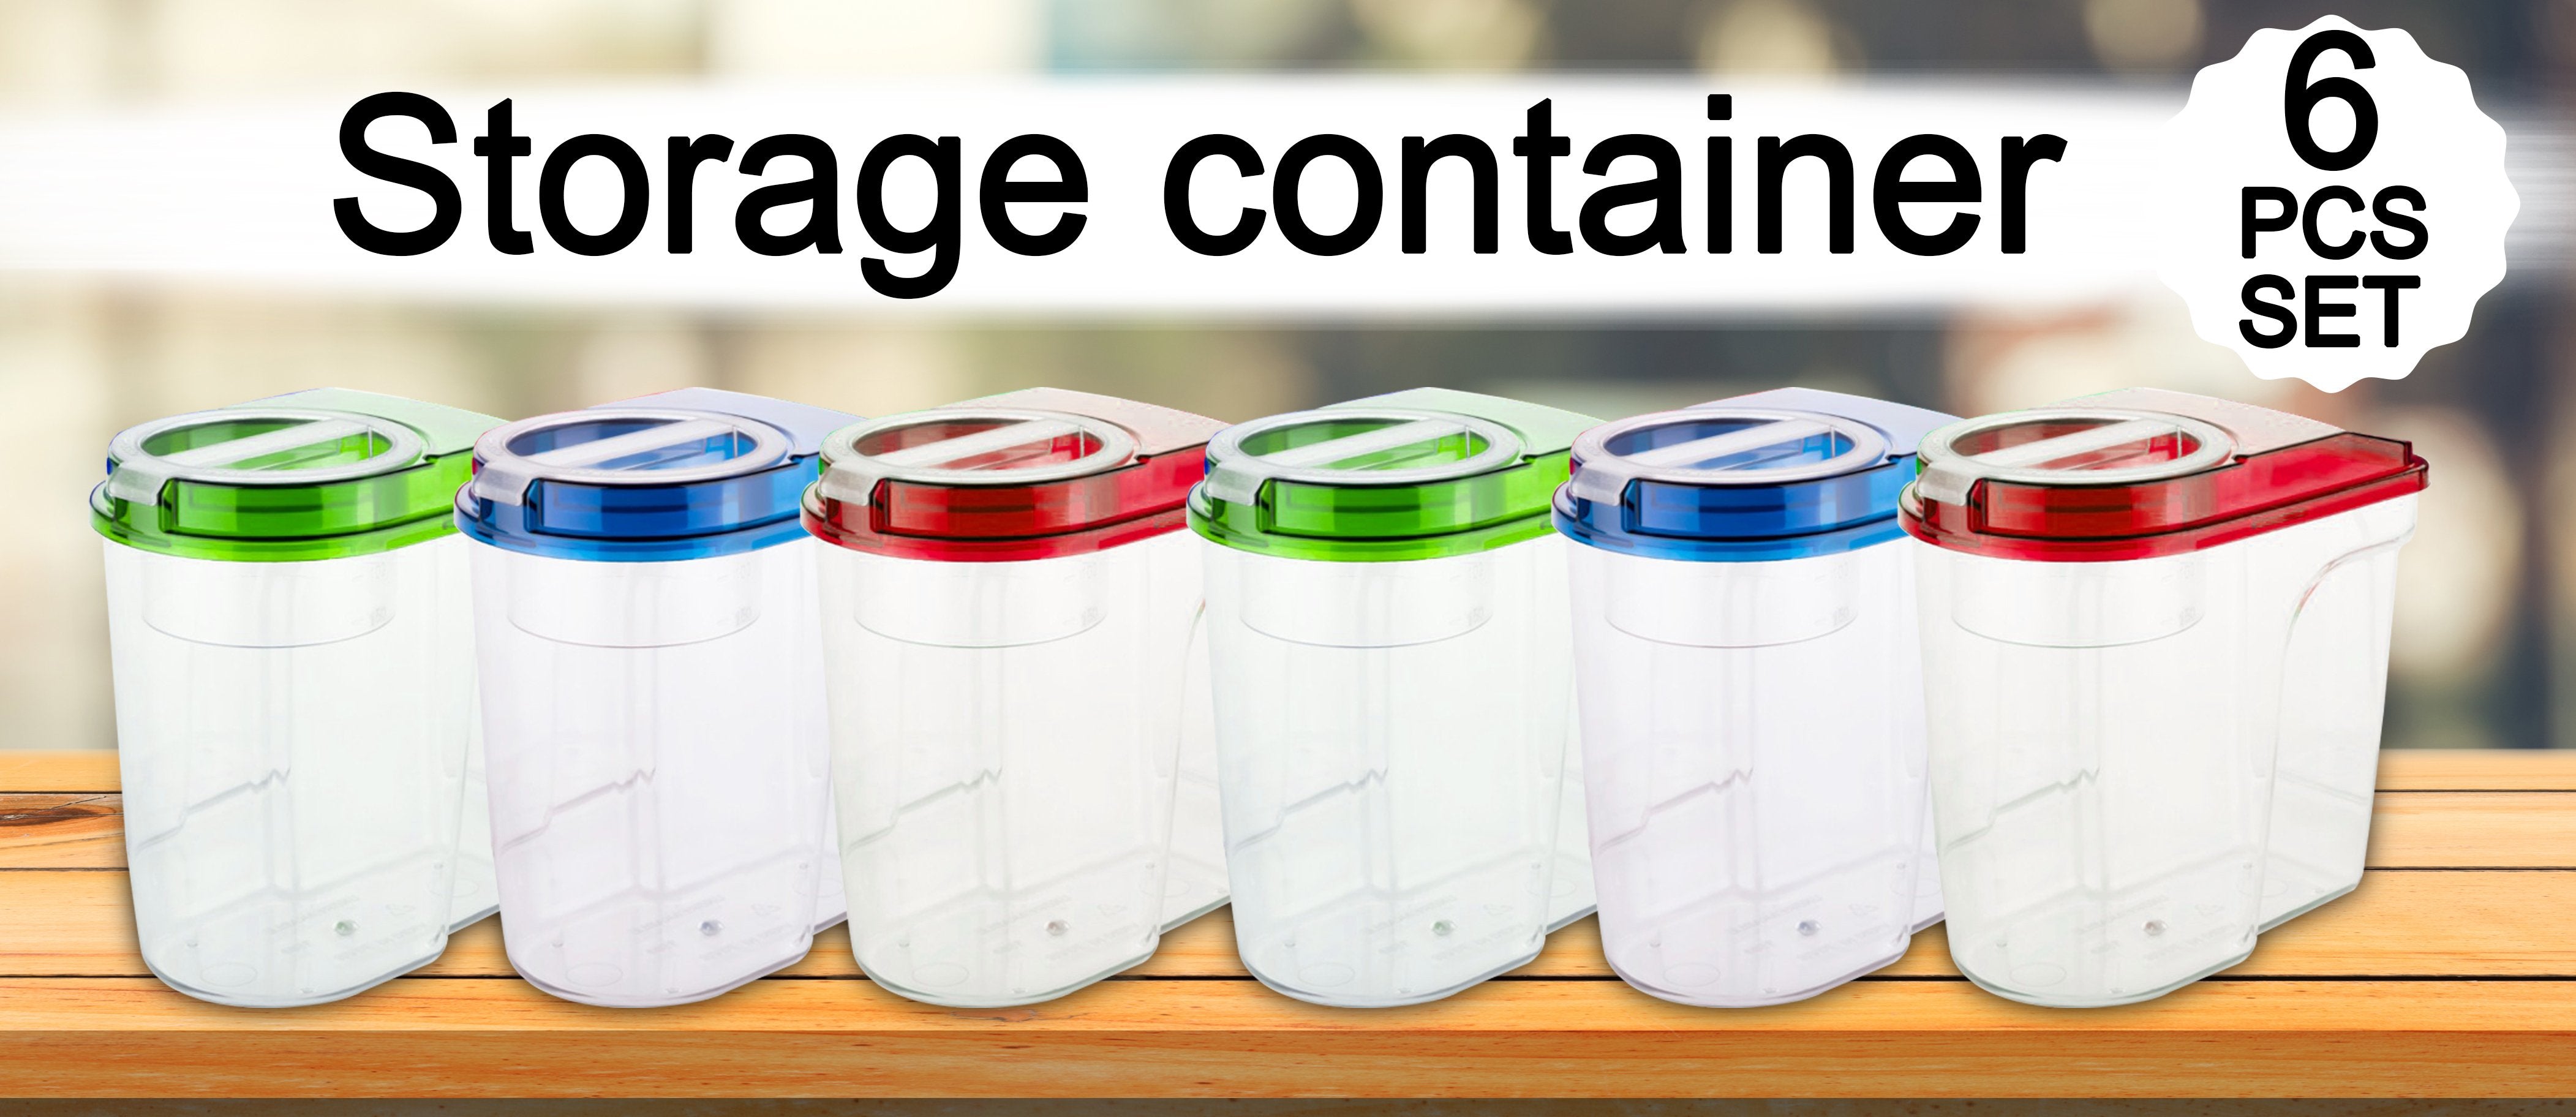 2469 Plastic Storage container Set with Opening Mouth 1500ml (Pack of 6) - SkyShopy